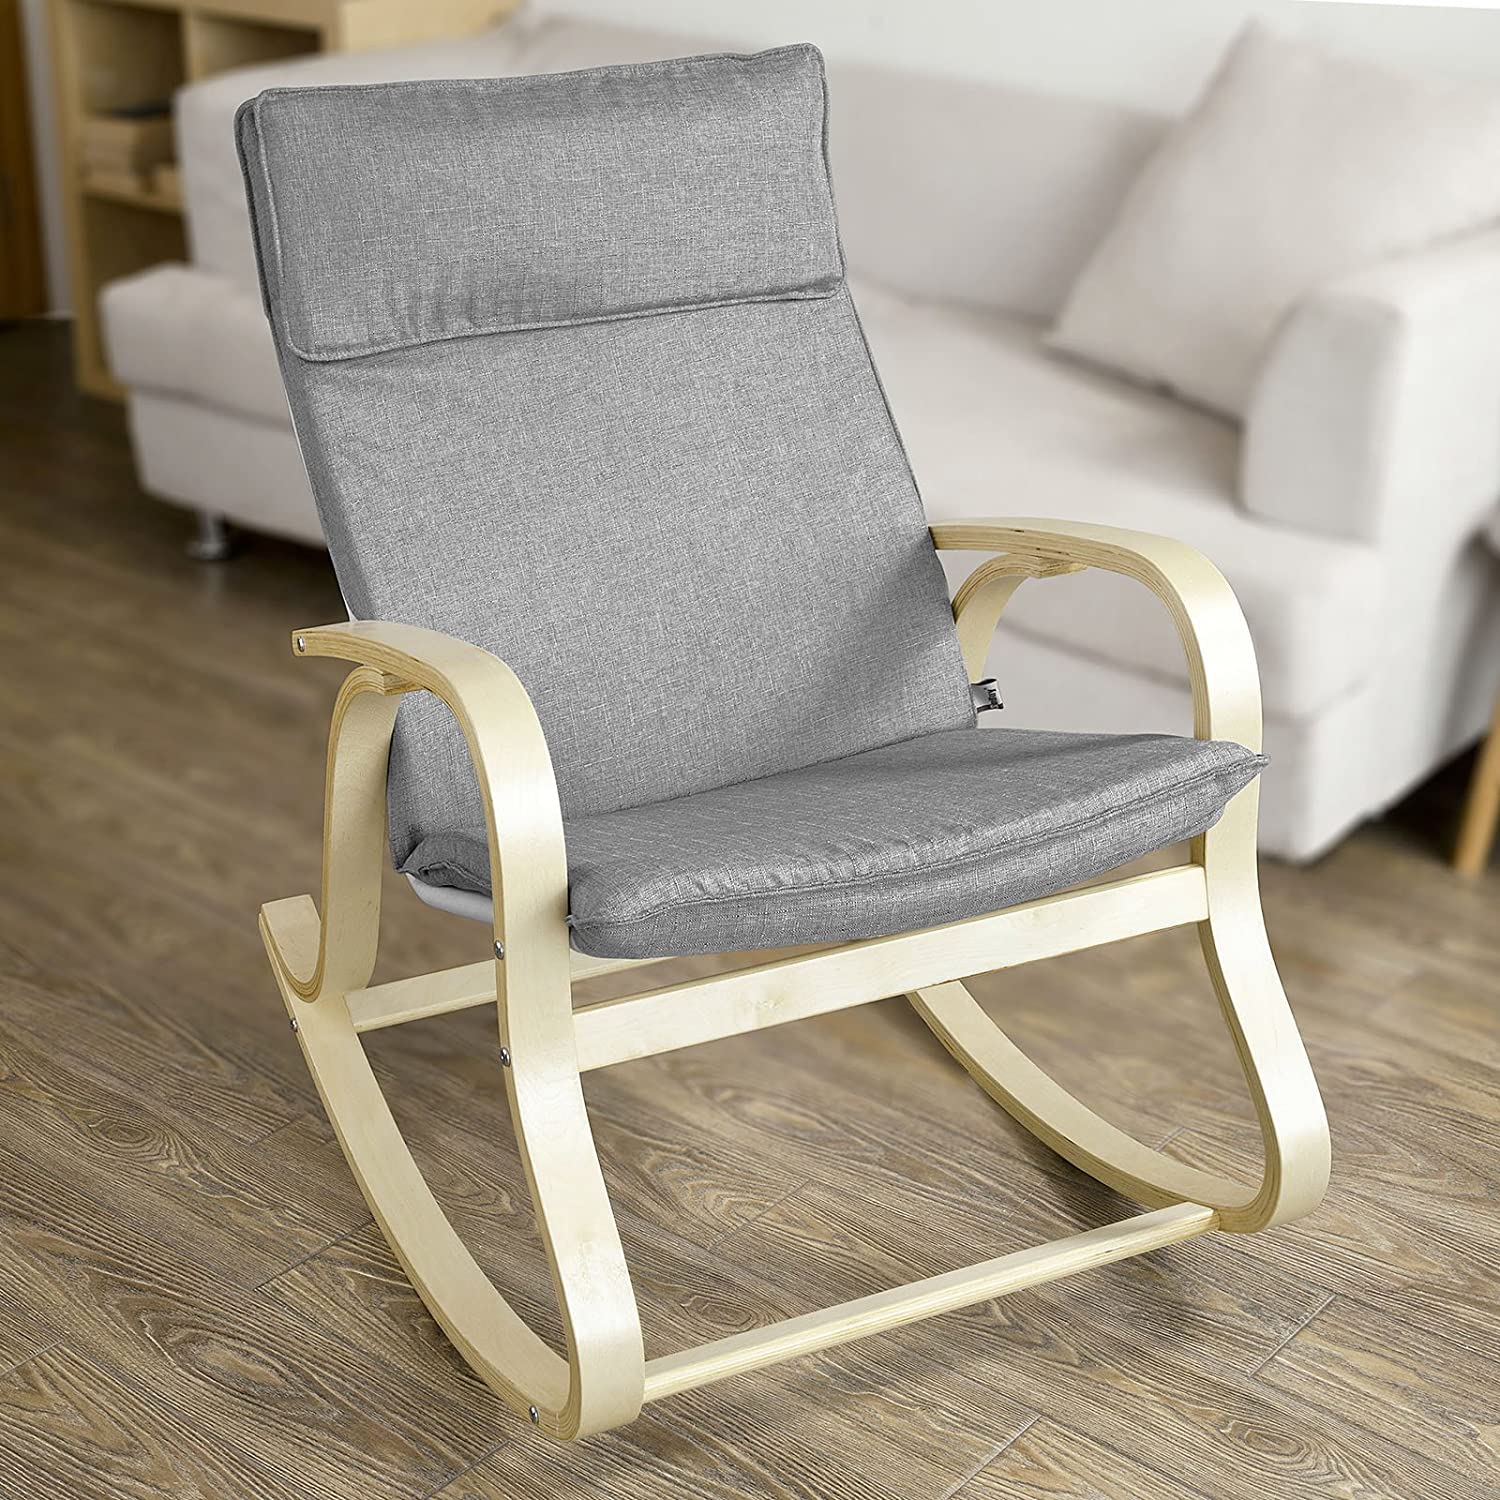 Comfortable Relax Rocking Chair